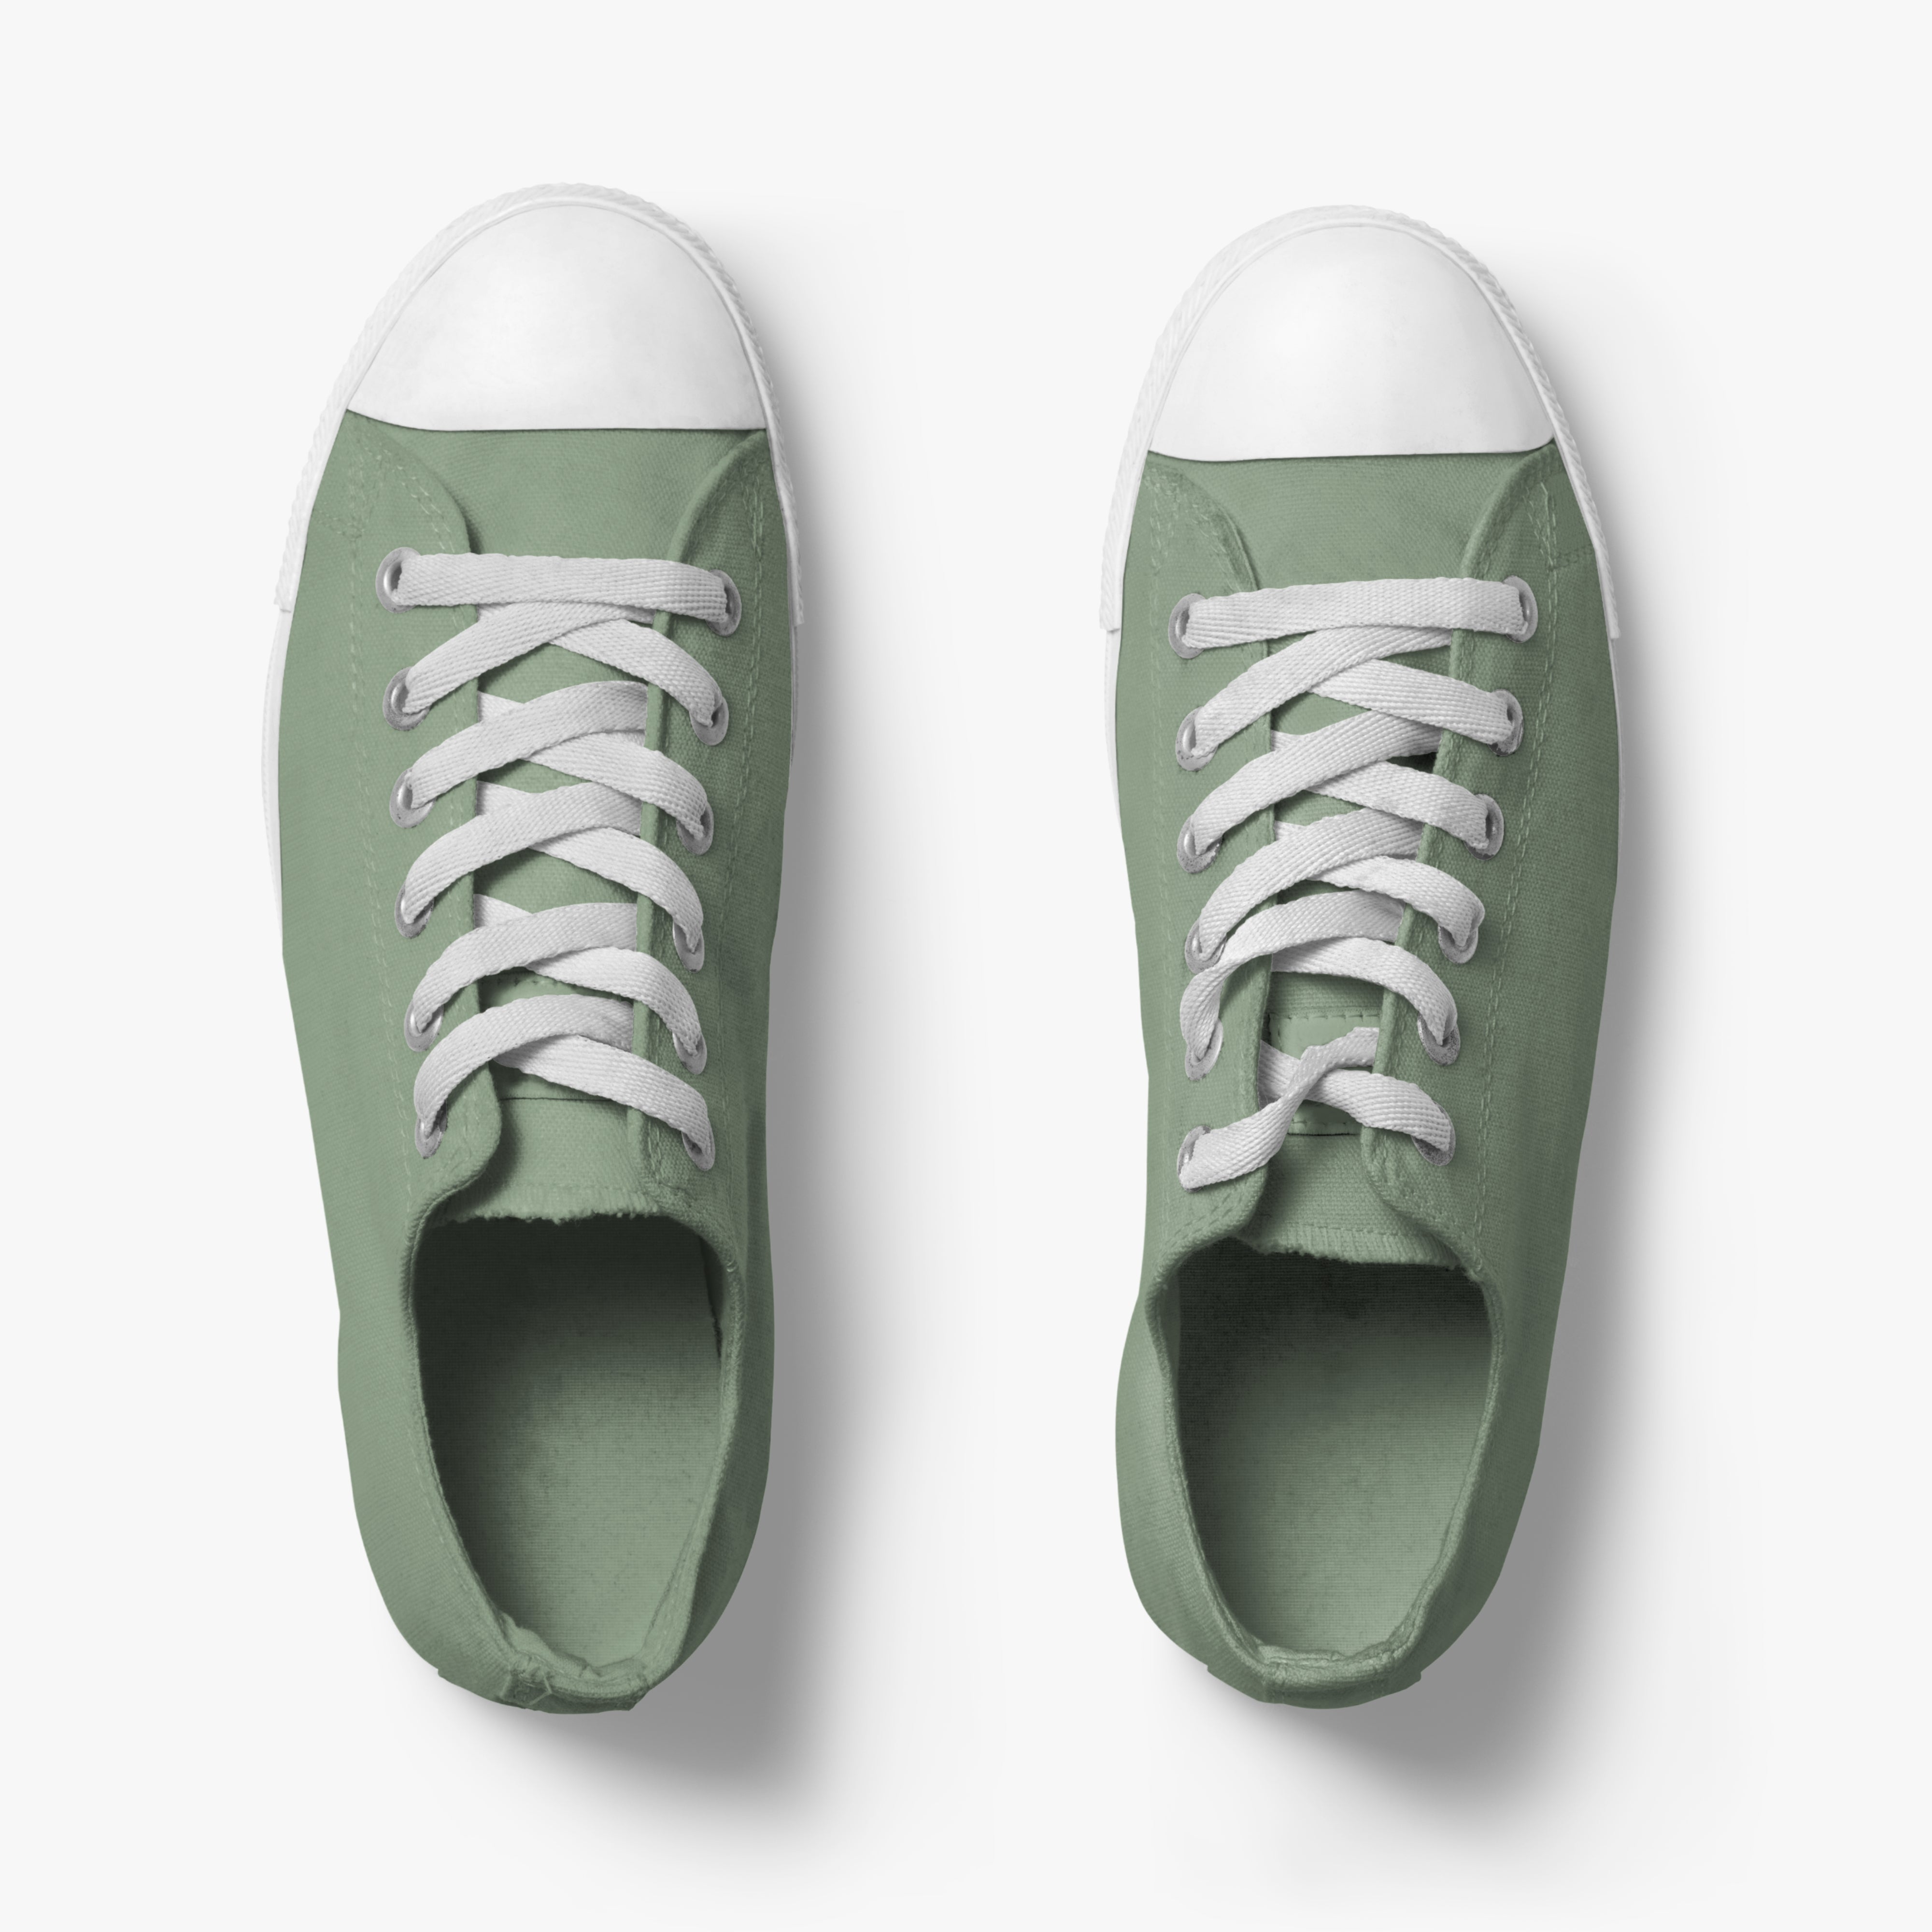 The shoe is a pair of "Nothing" shoes from Wellington in green color and with a sponge gift for every new order.